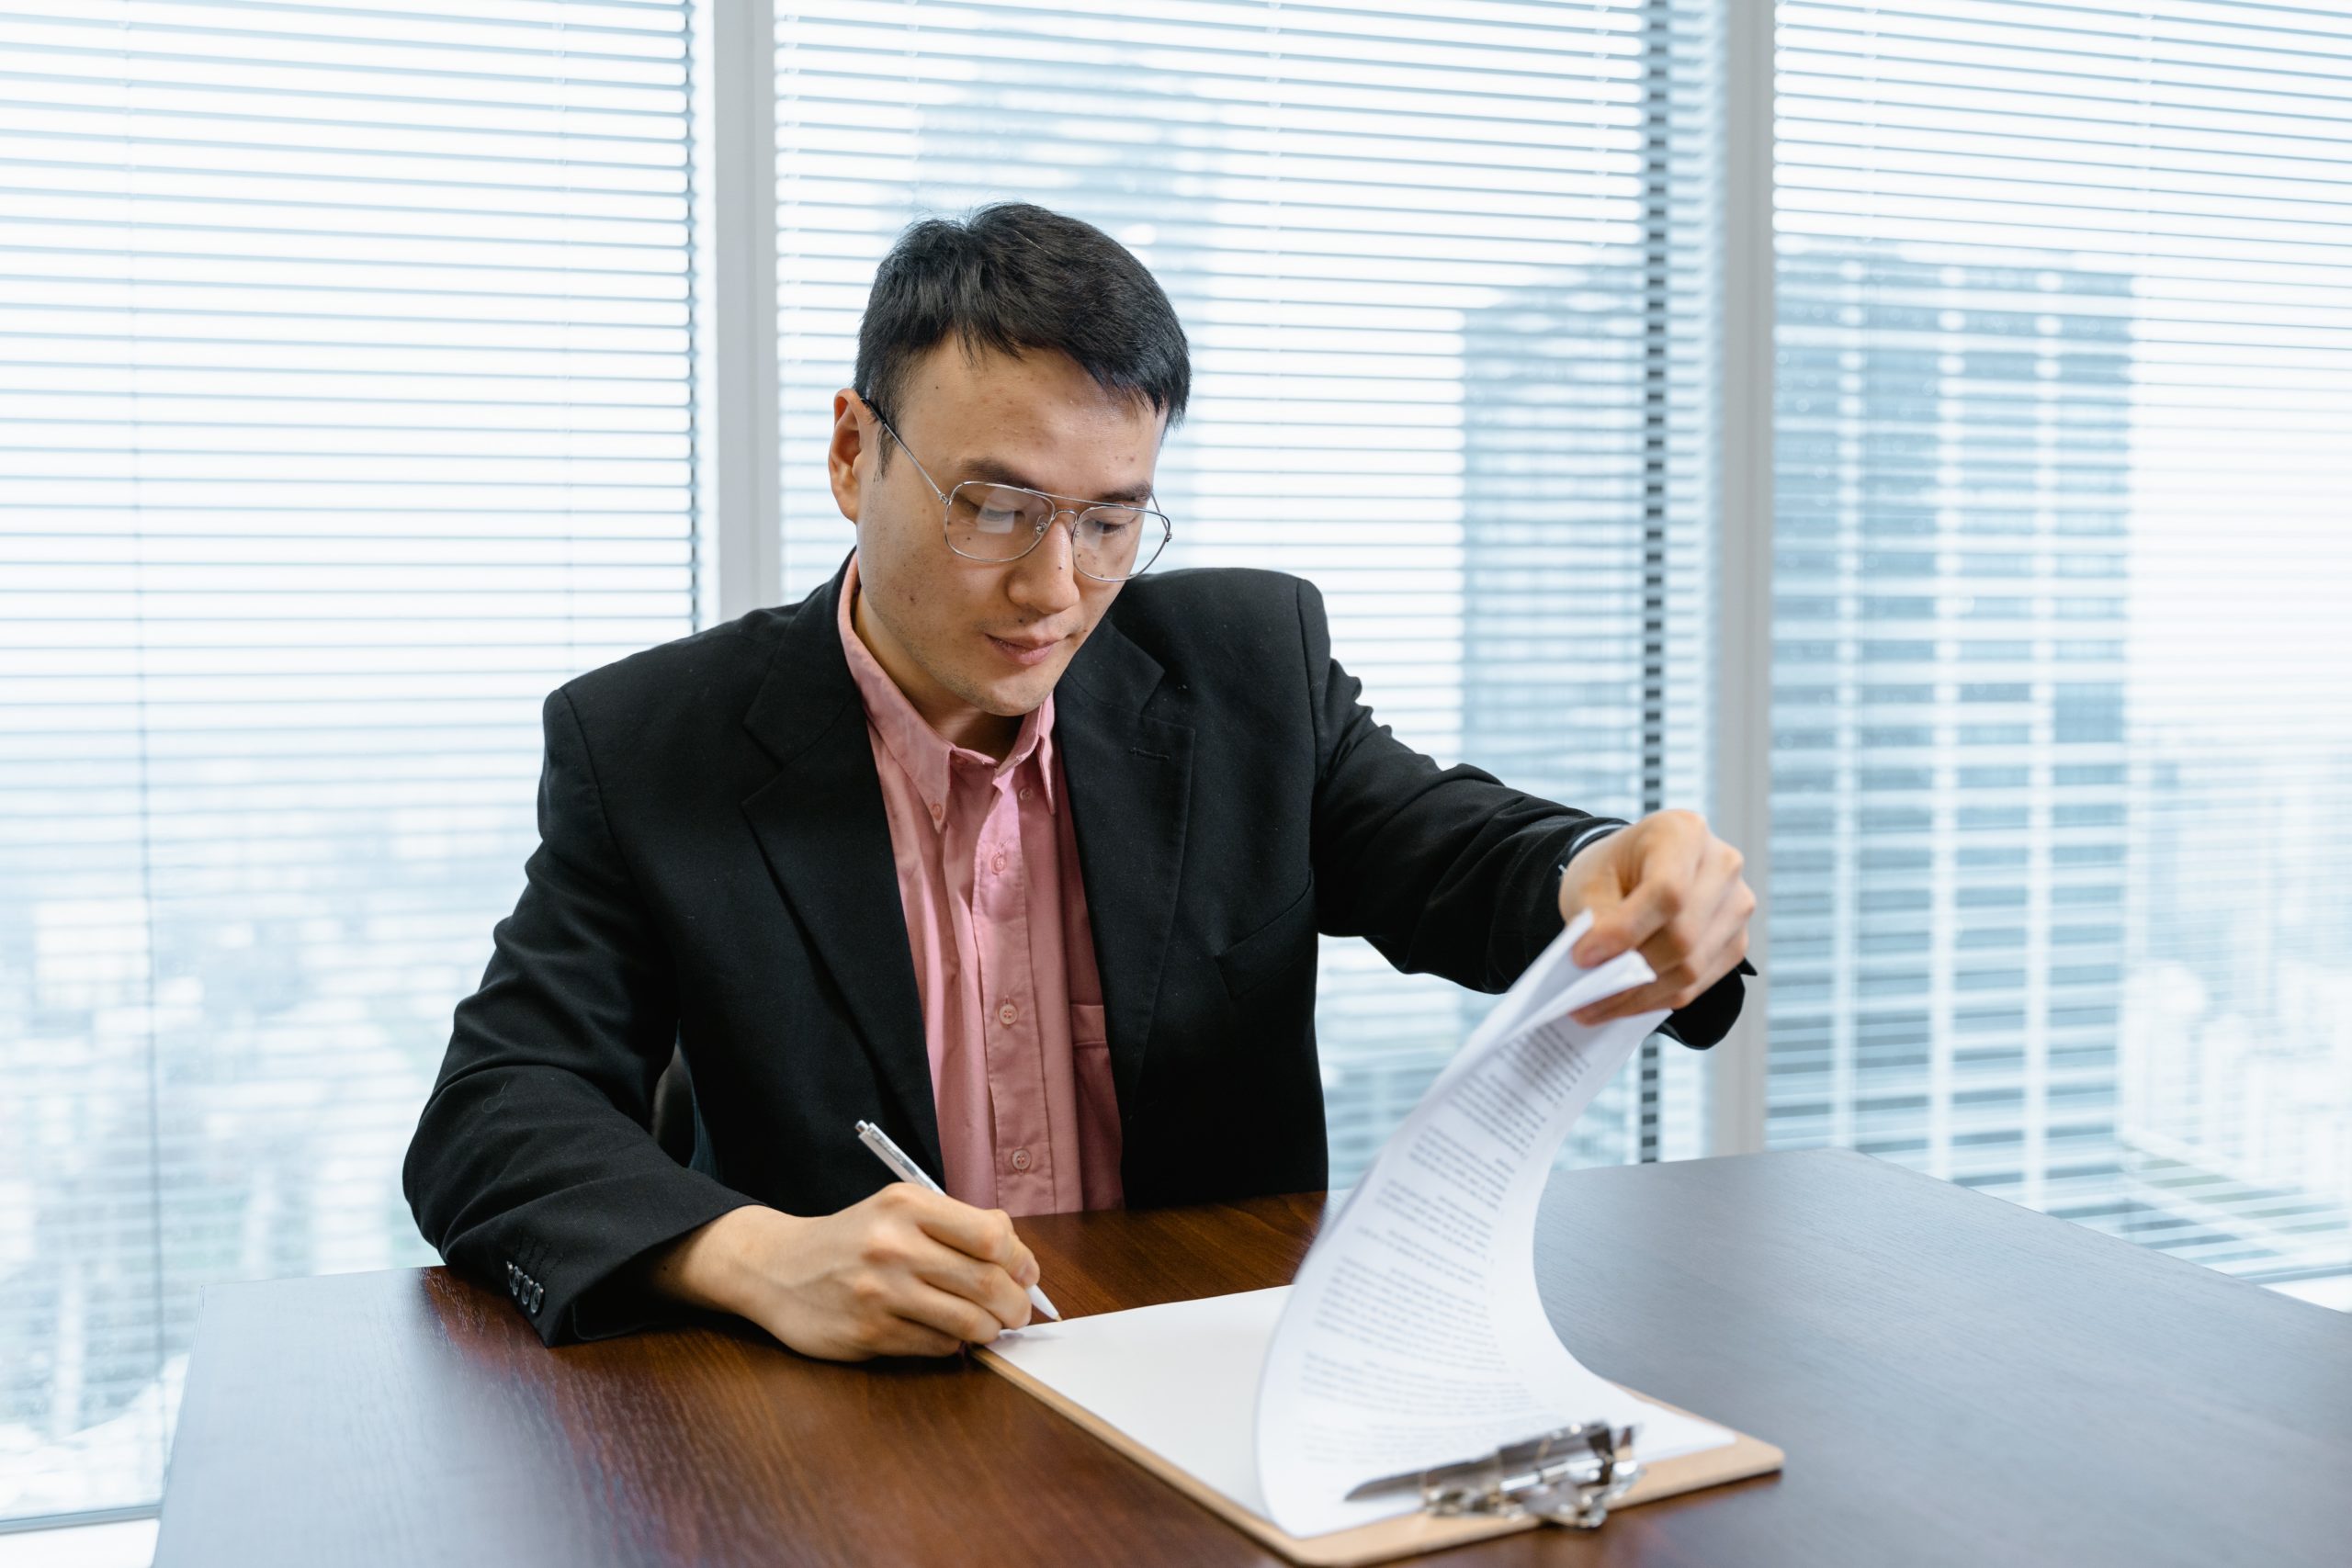 A man is looking through several sheets of paper on a clipboard.